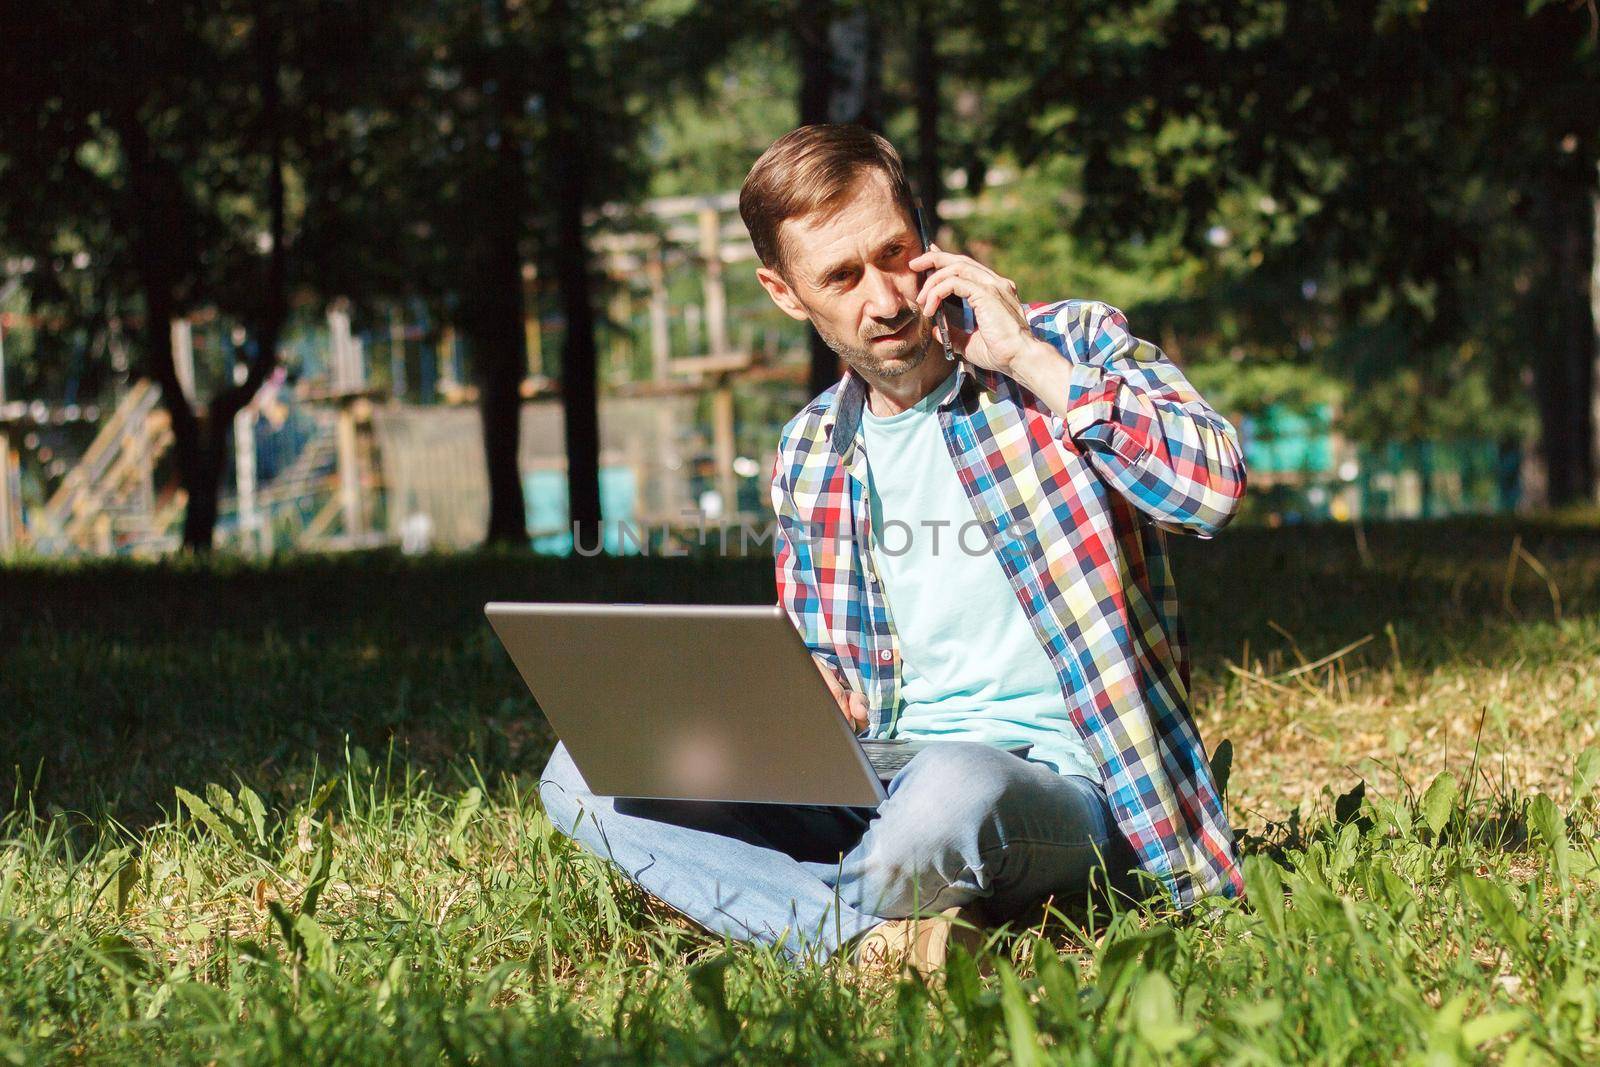 Adult man works on his computer in the park on the lawn.Remote work concept. The writer works remotely, enjoying nature.